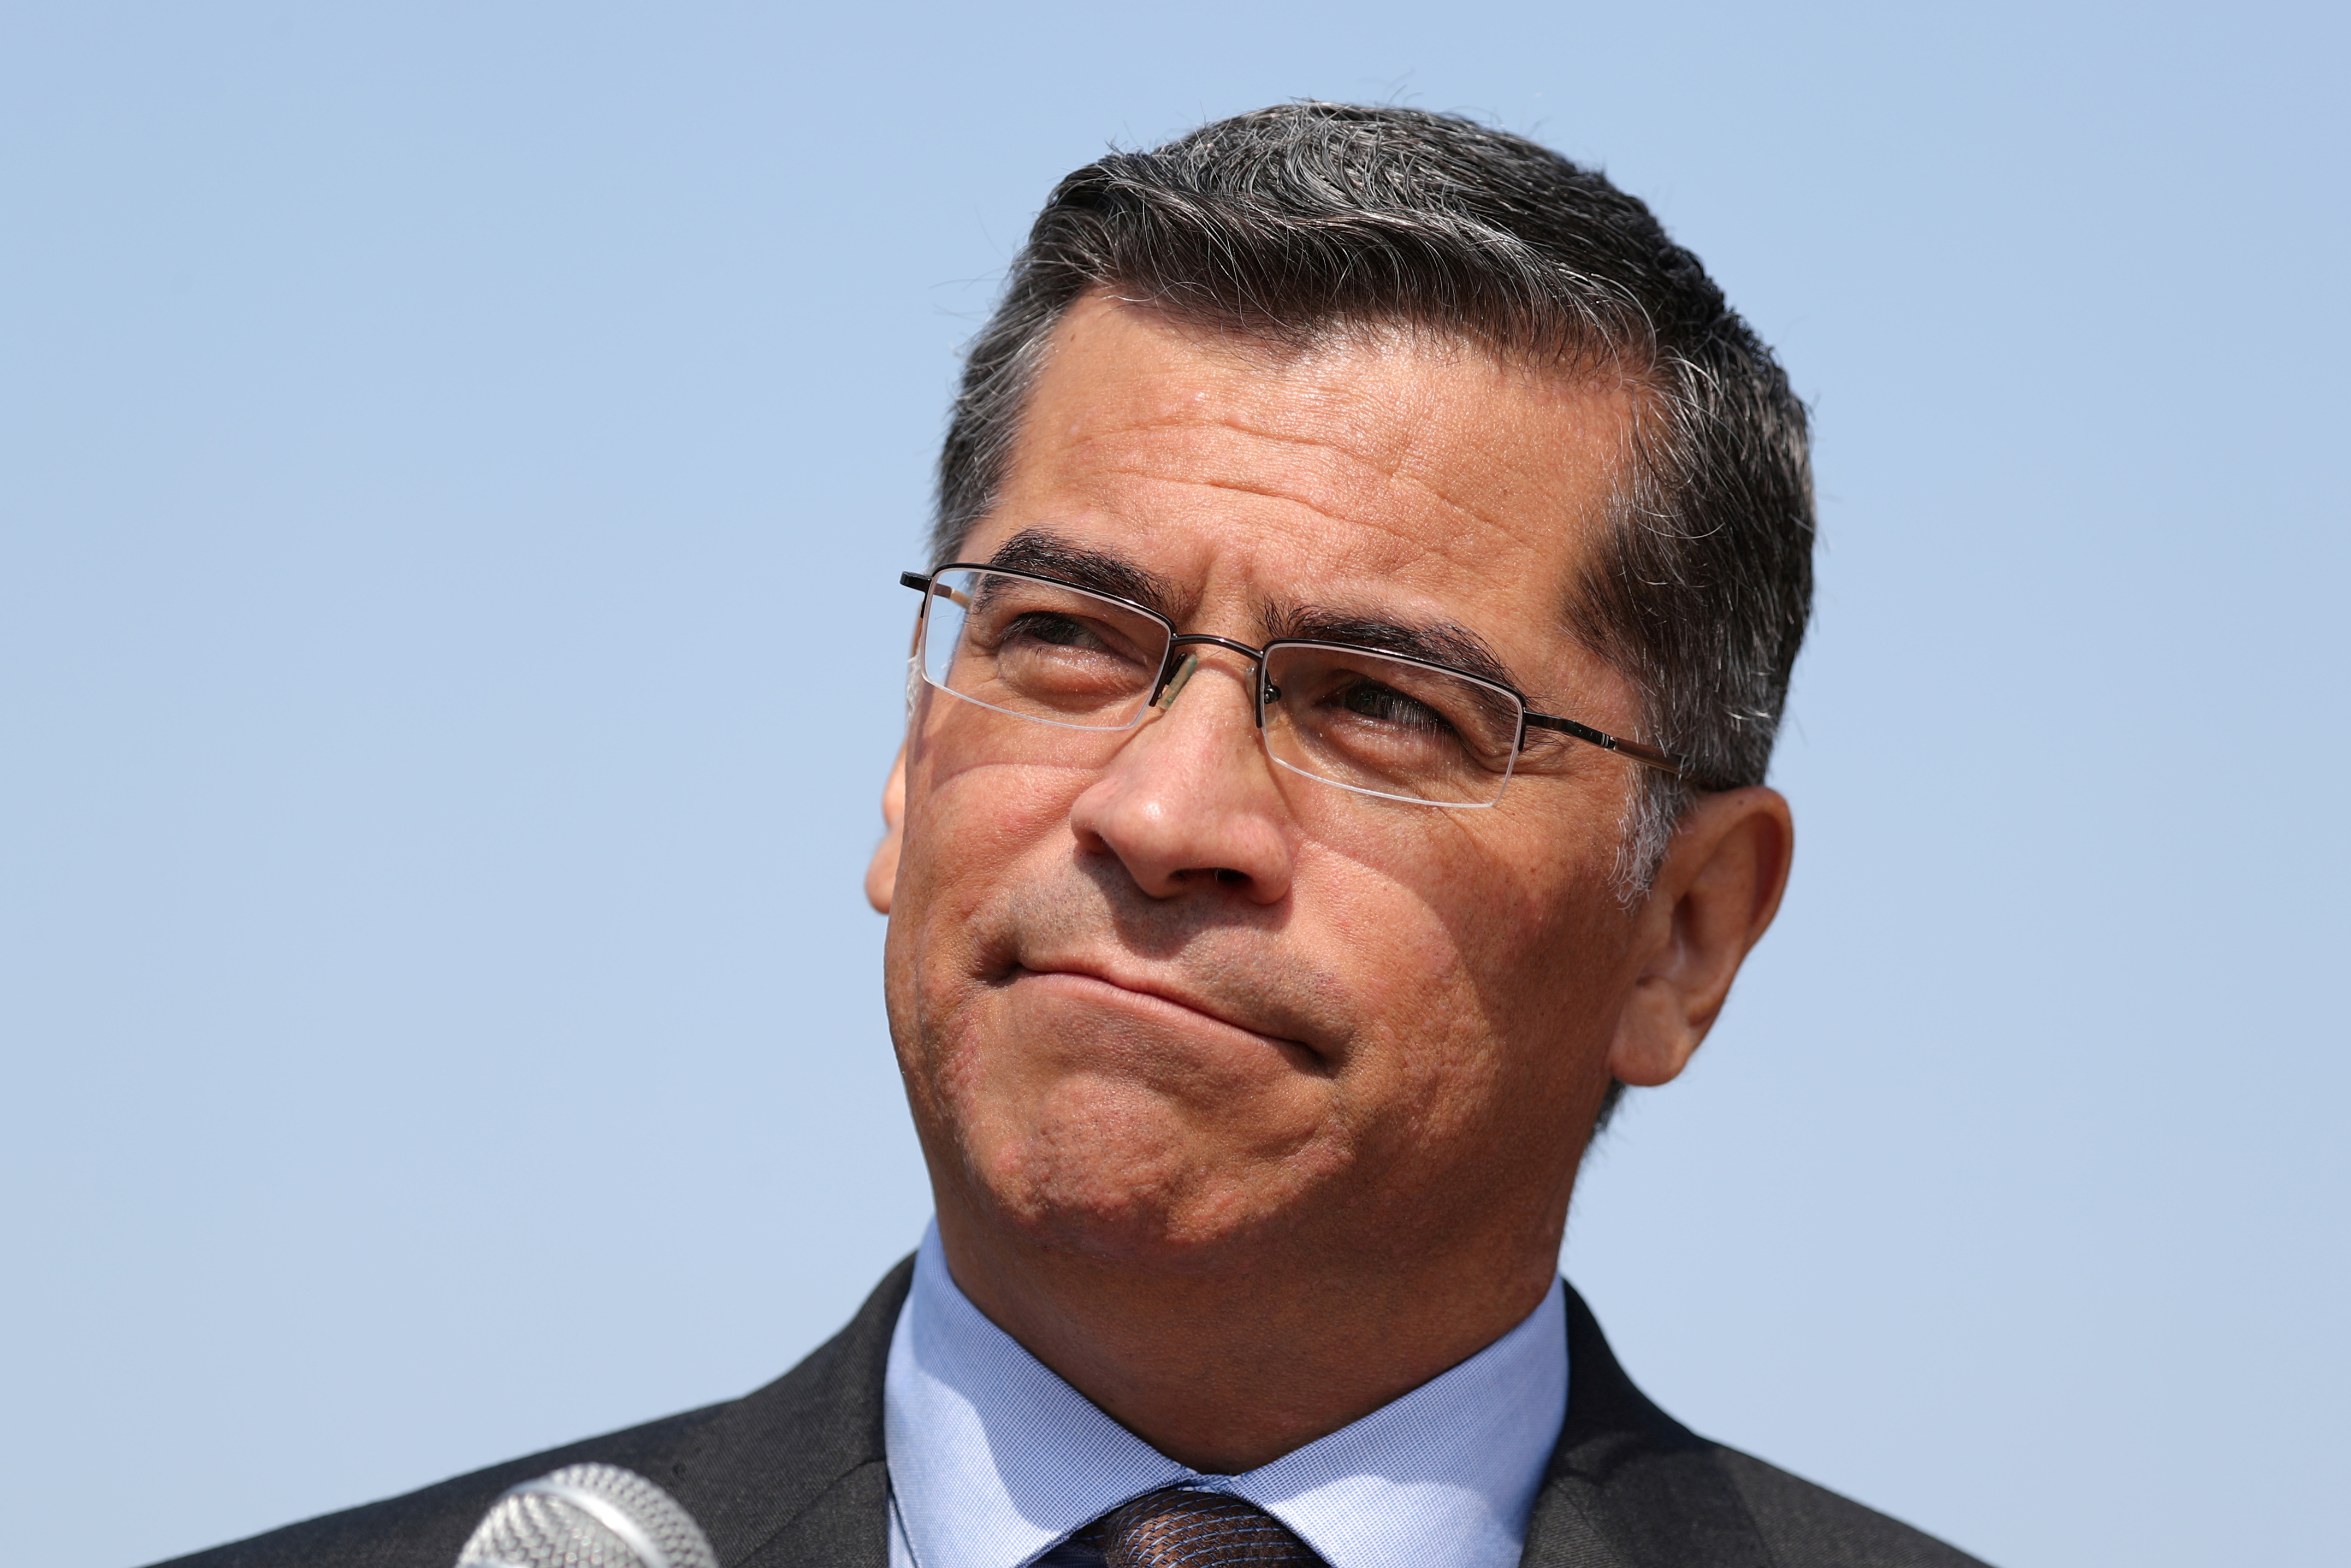 California Attorney General Xavier Becerra speaks about President Trump's proposal to weaken national greenhouse gas emission and fuel efficiency regulations, at a media conference in Los Angeles